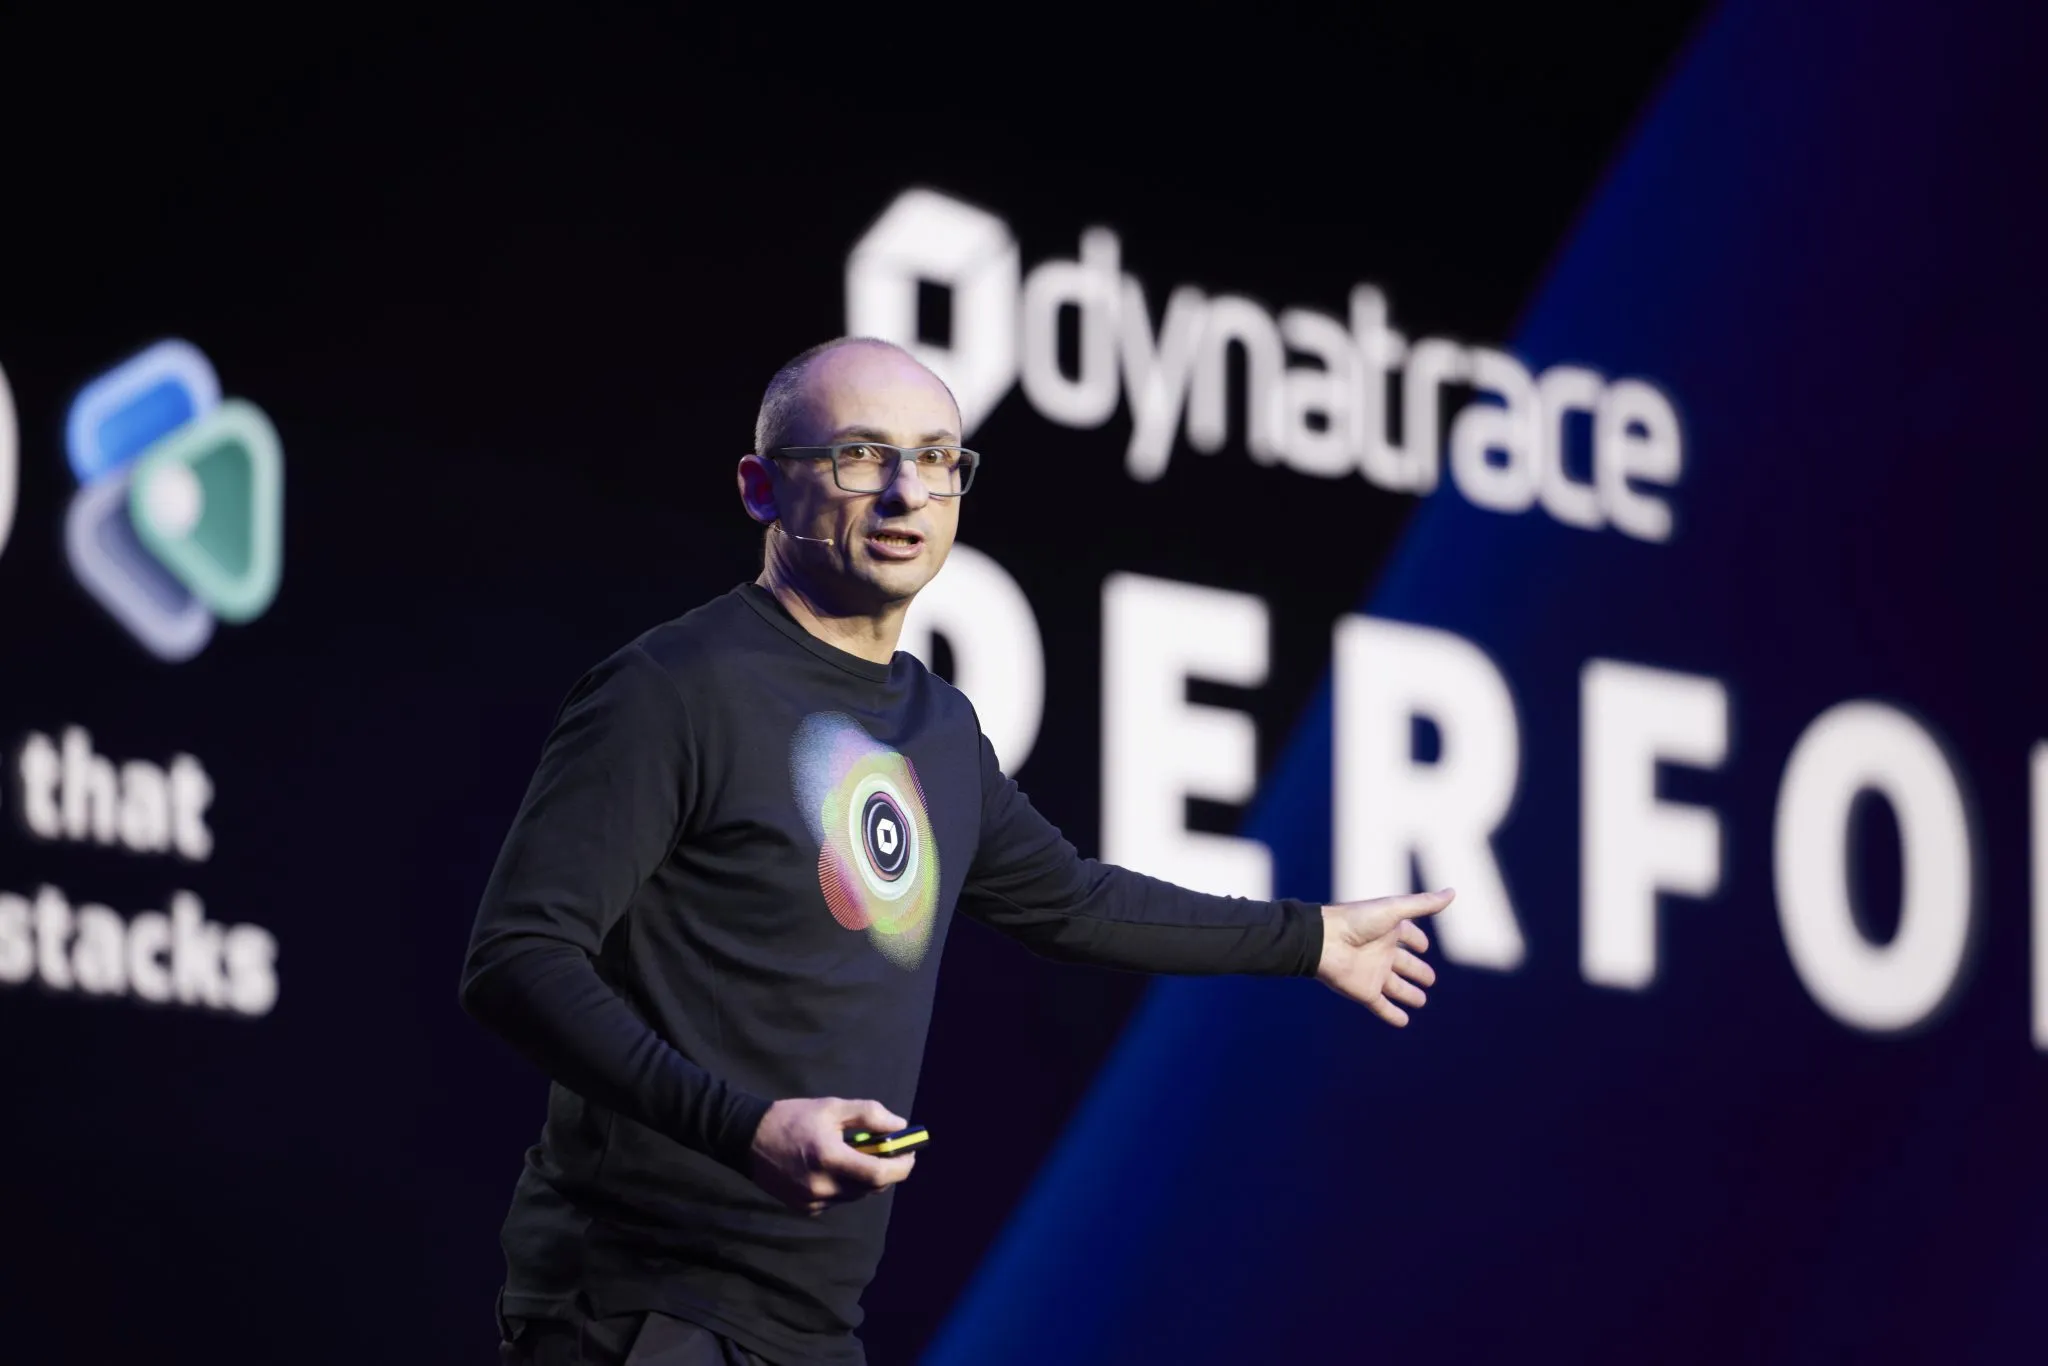 Let's talk observability solutions with Dynatrace CTO Bernd Greifeneder.